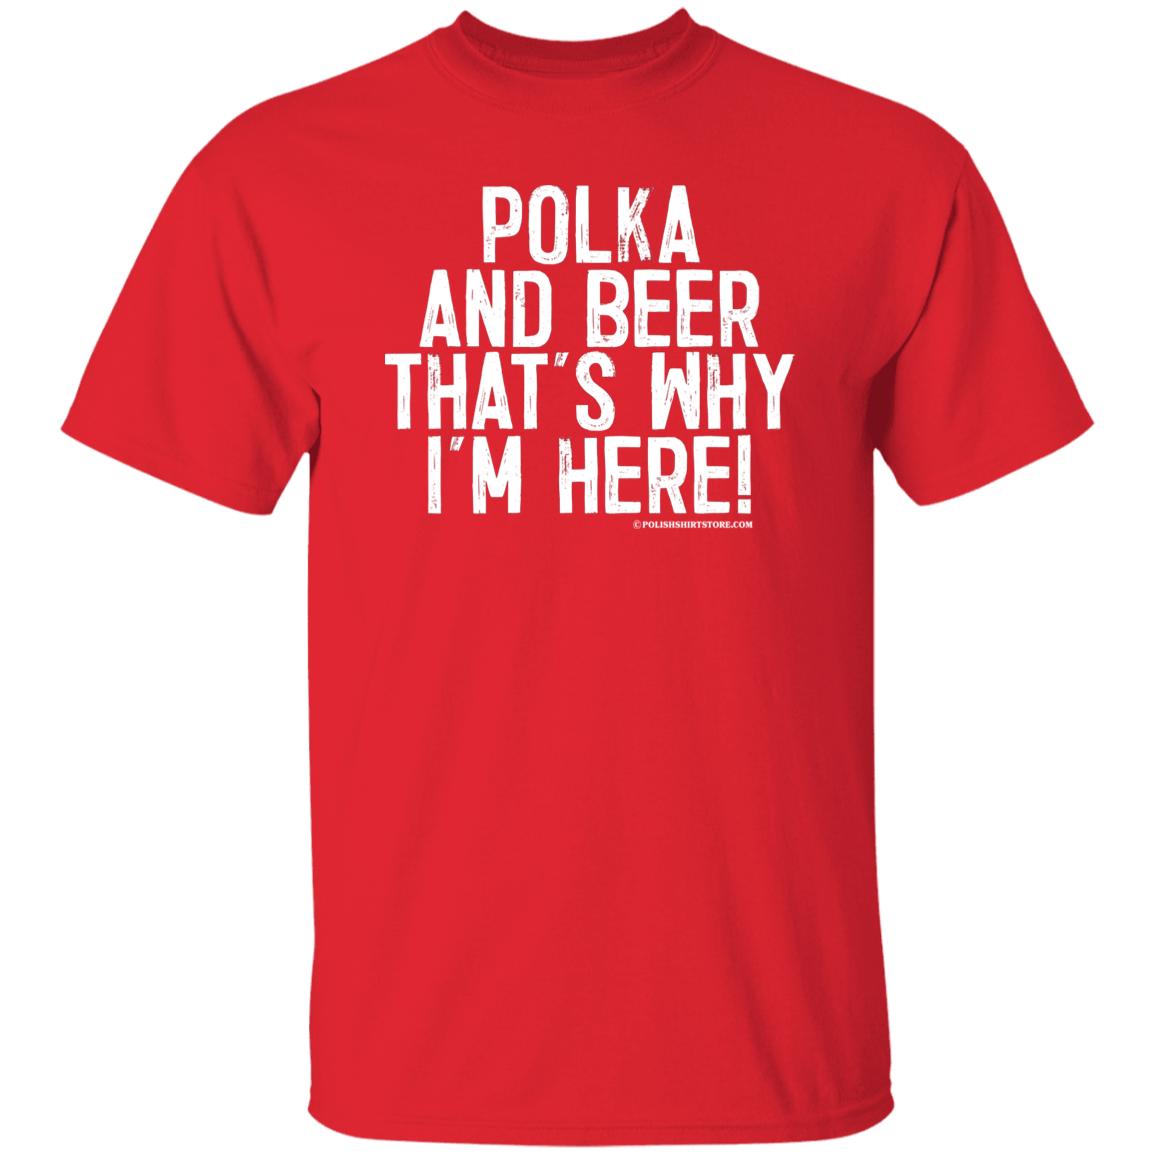 Polka and Beer That's Why I'm Here Apparel CustomCat G500 5.3 oz. T-Shirt Red S